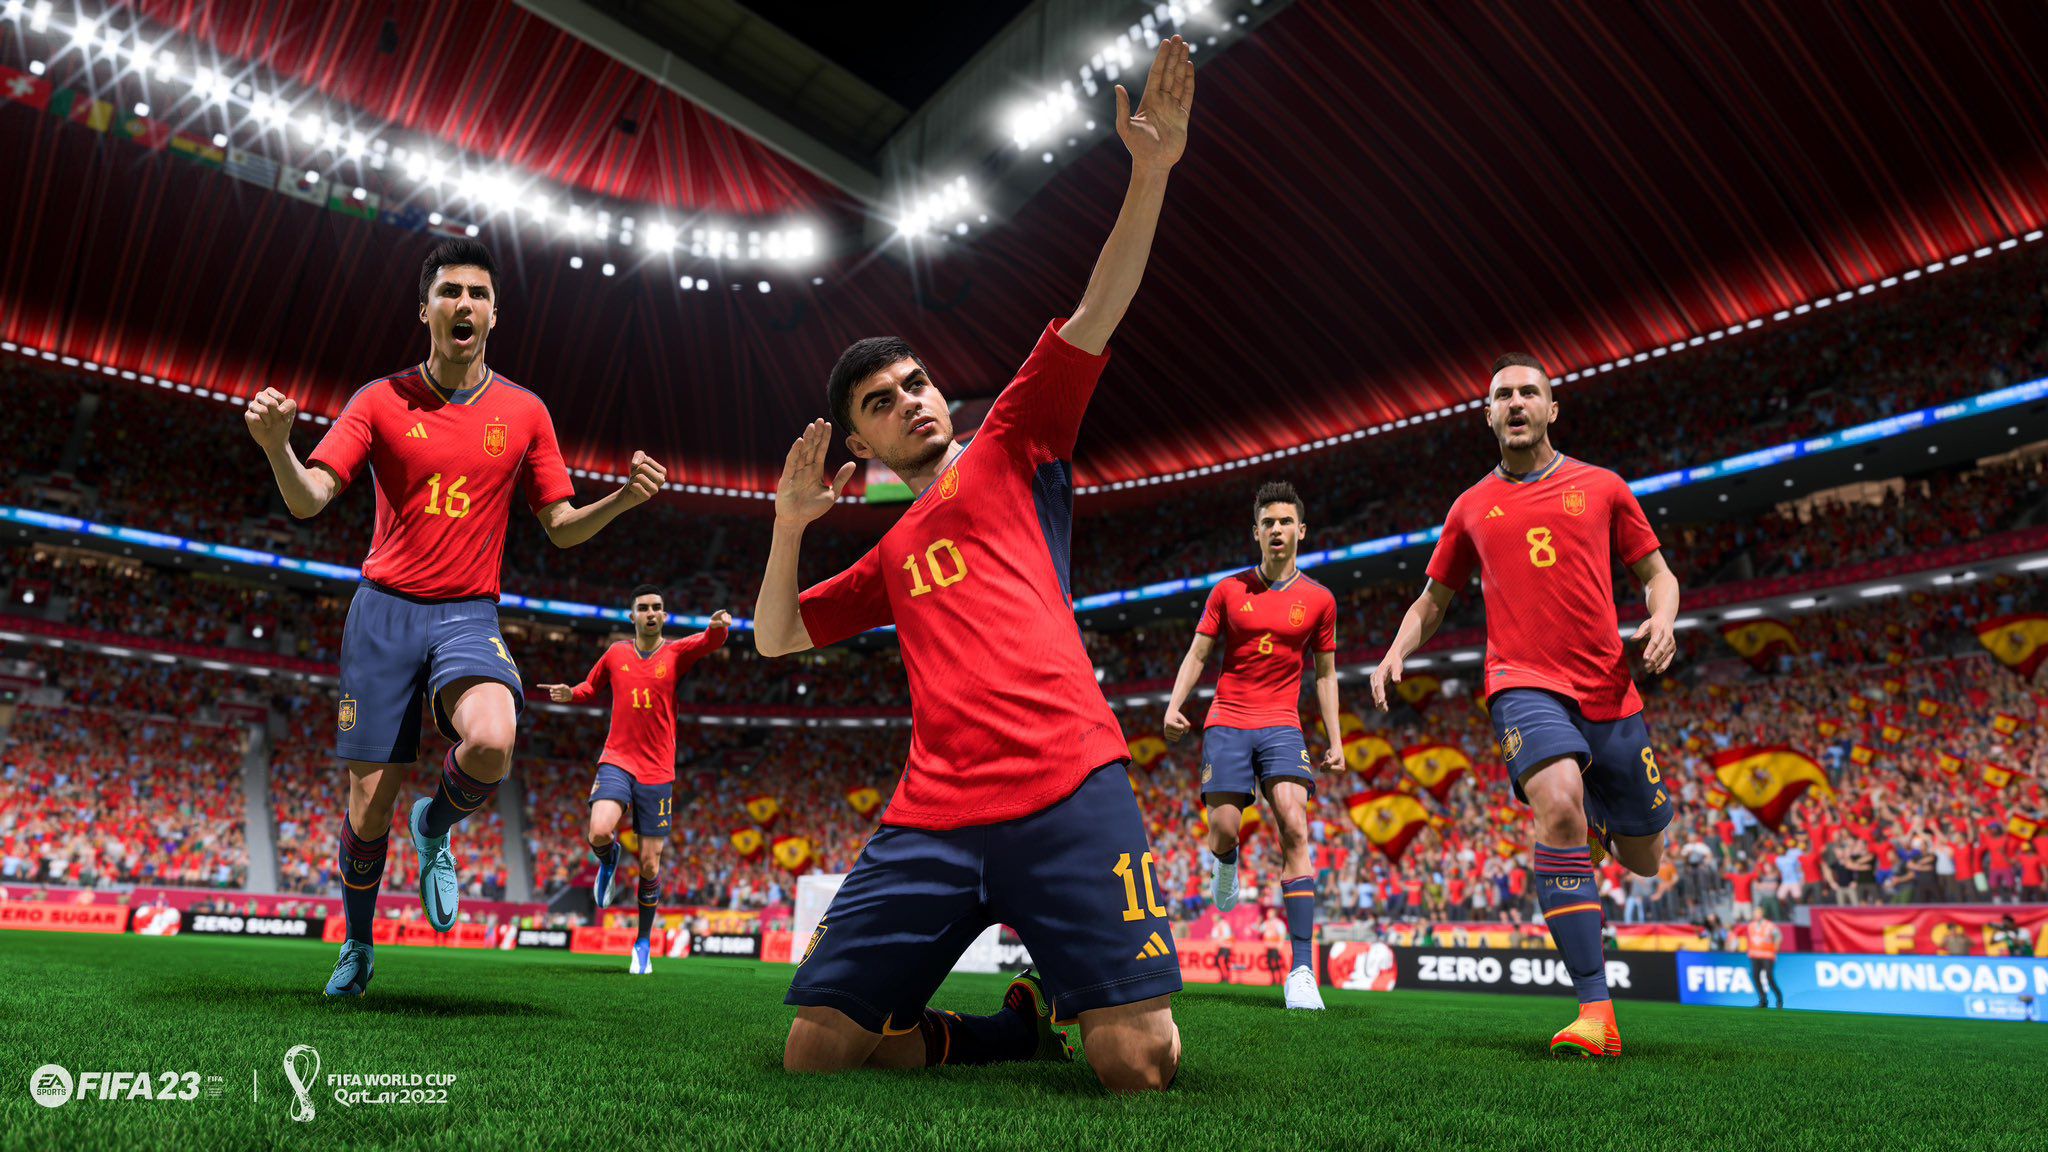 FIFA World Cup 2022 arrives next week as a free update for FIFA 23